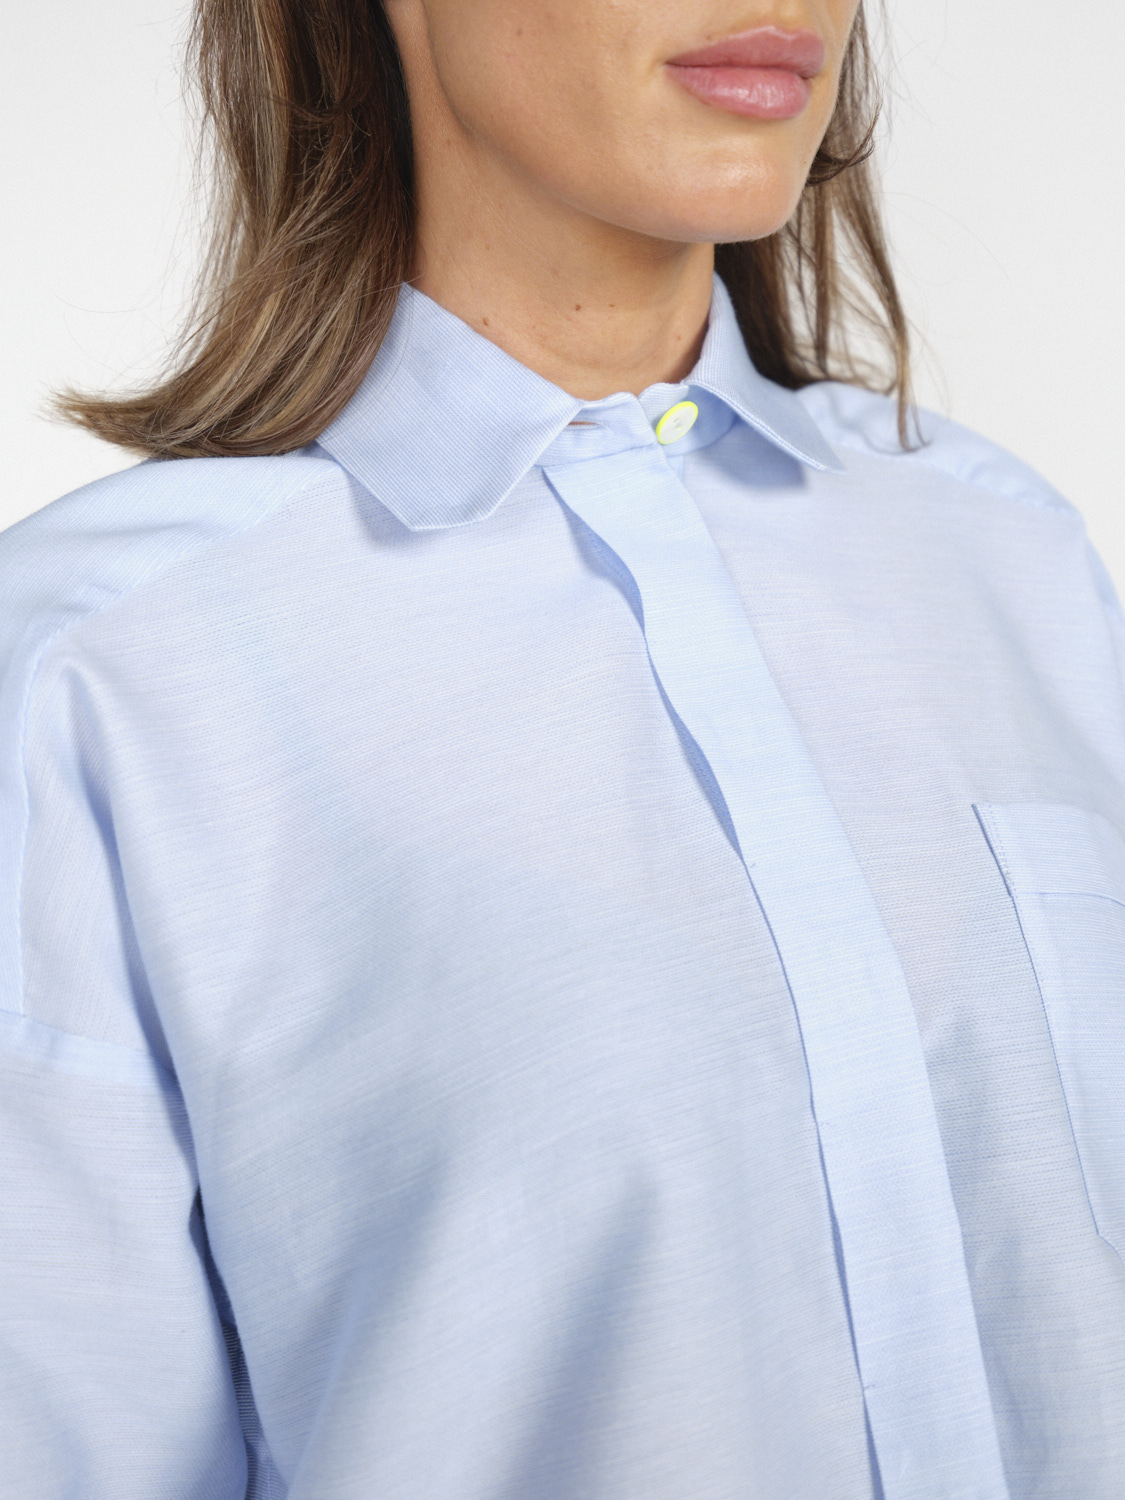 Antonia Zander Blouse made from a cotton-silk mix  hellblau S